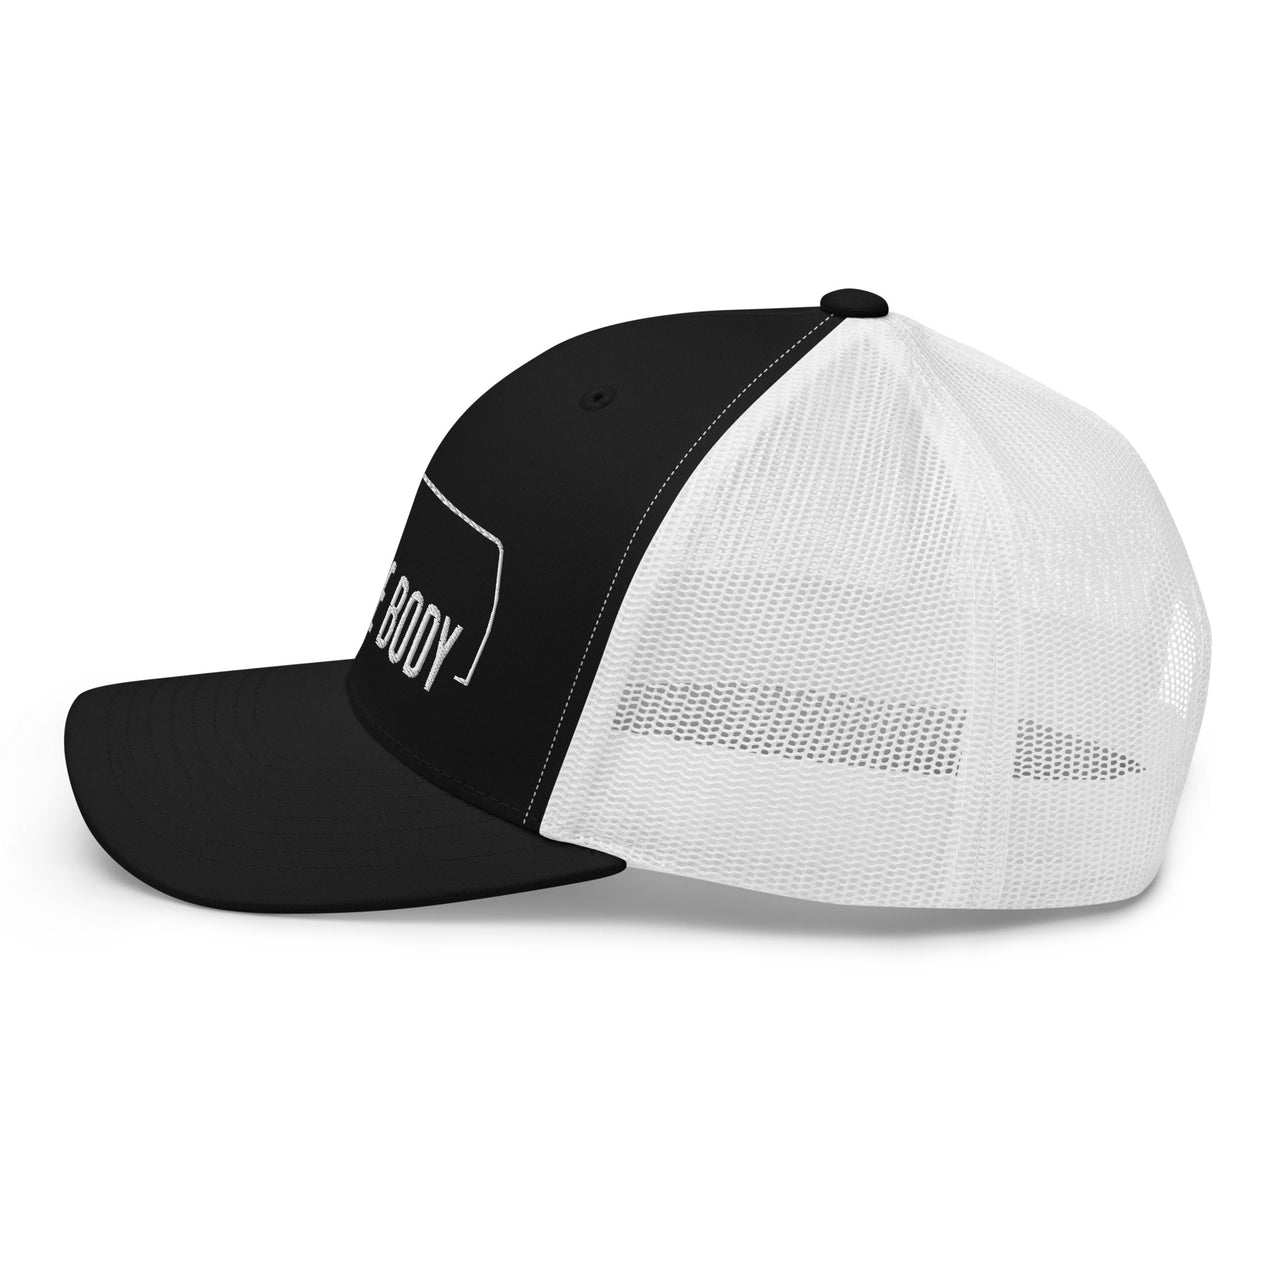 side view of a Square body K5 blazer trucker hat from aggressive thread in black and white